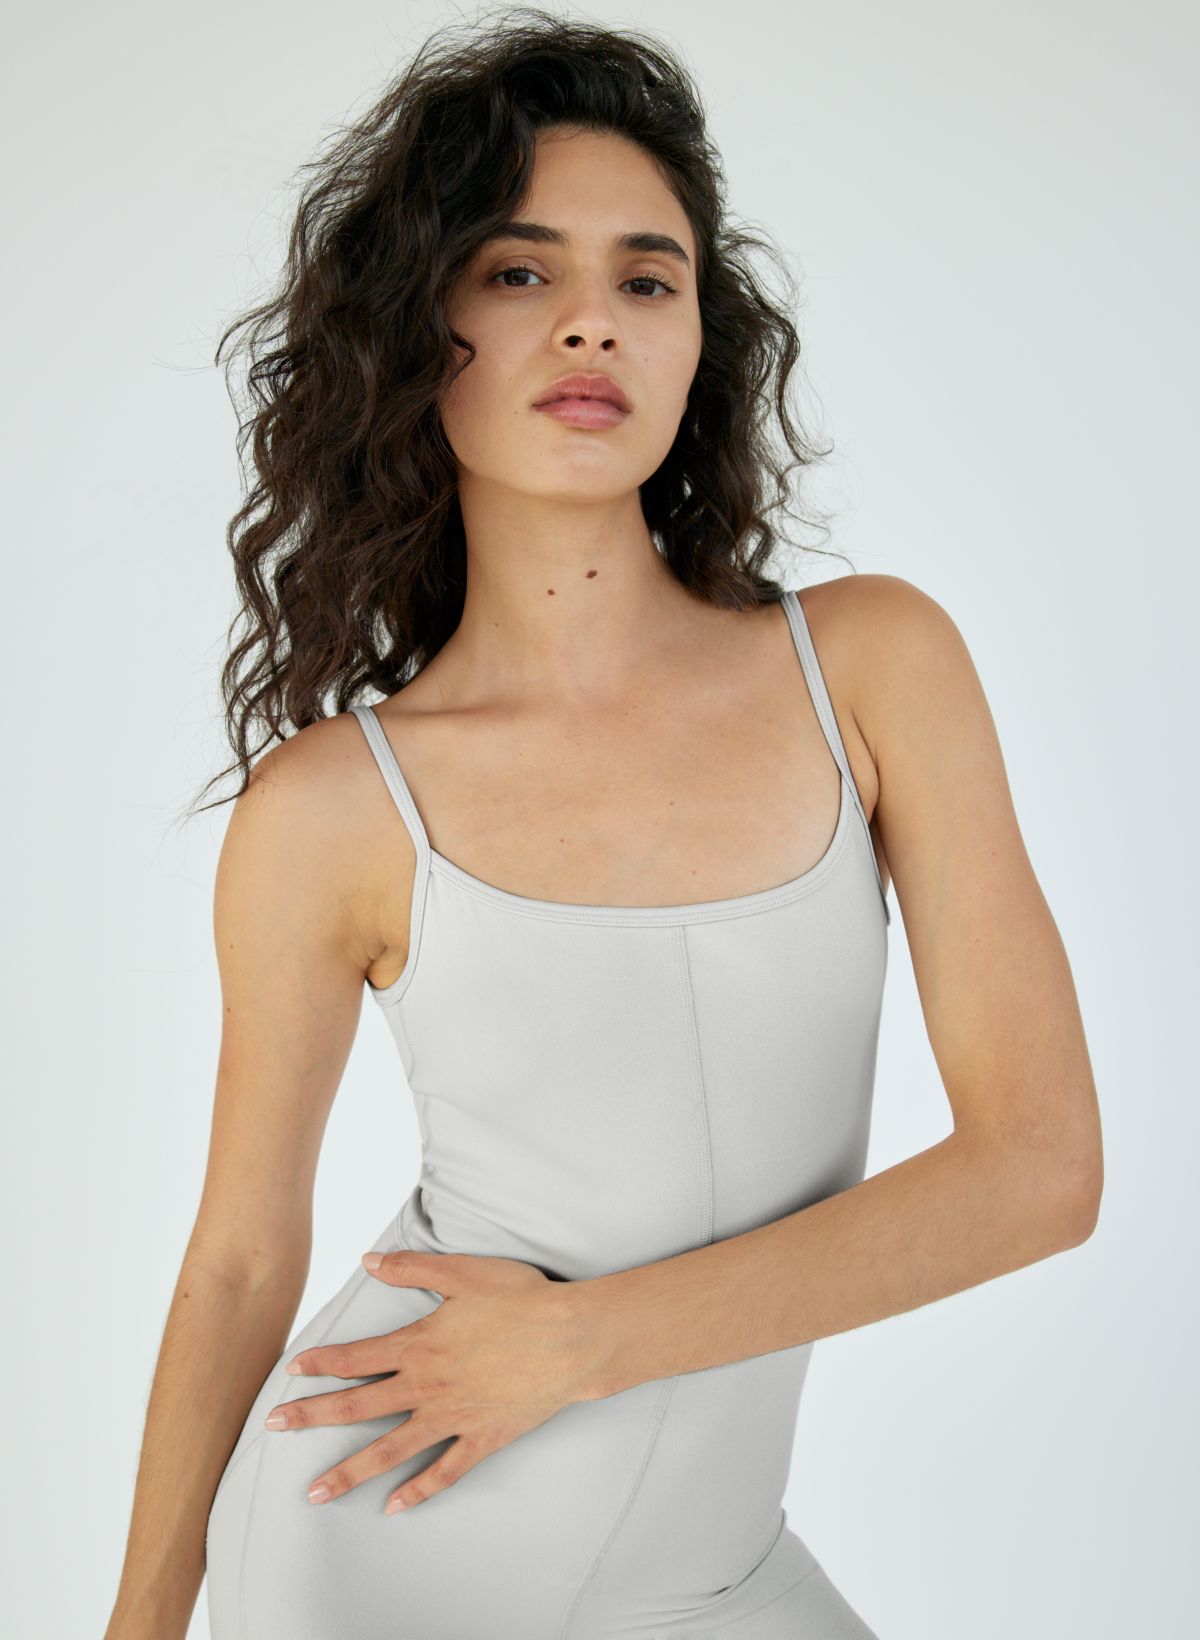 You need this. @aritzia Divinity Romper #styletips #summerstyle #fashi